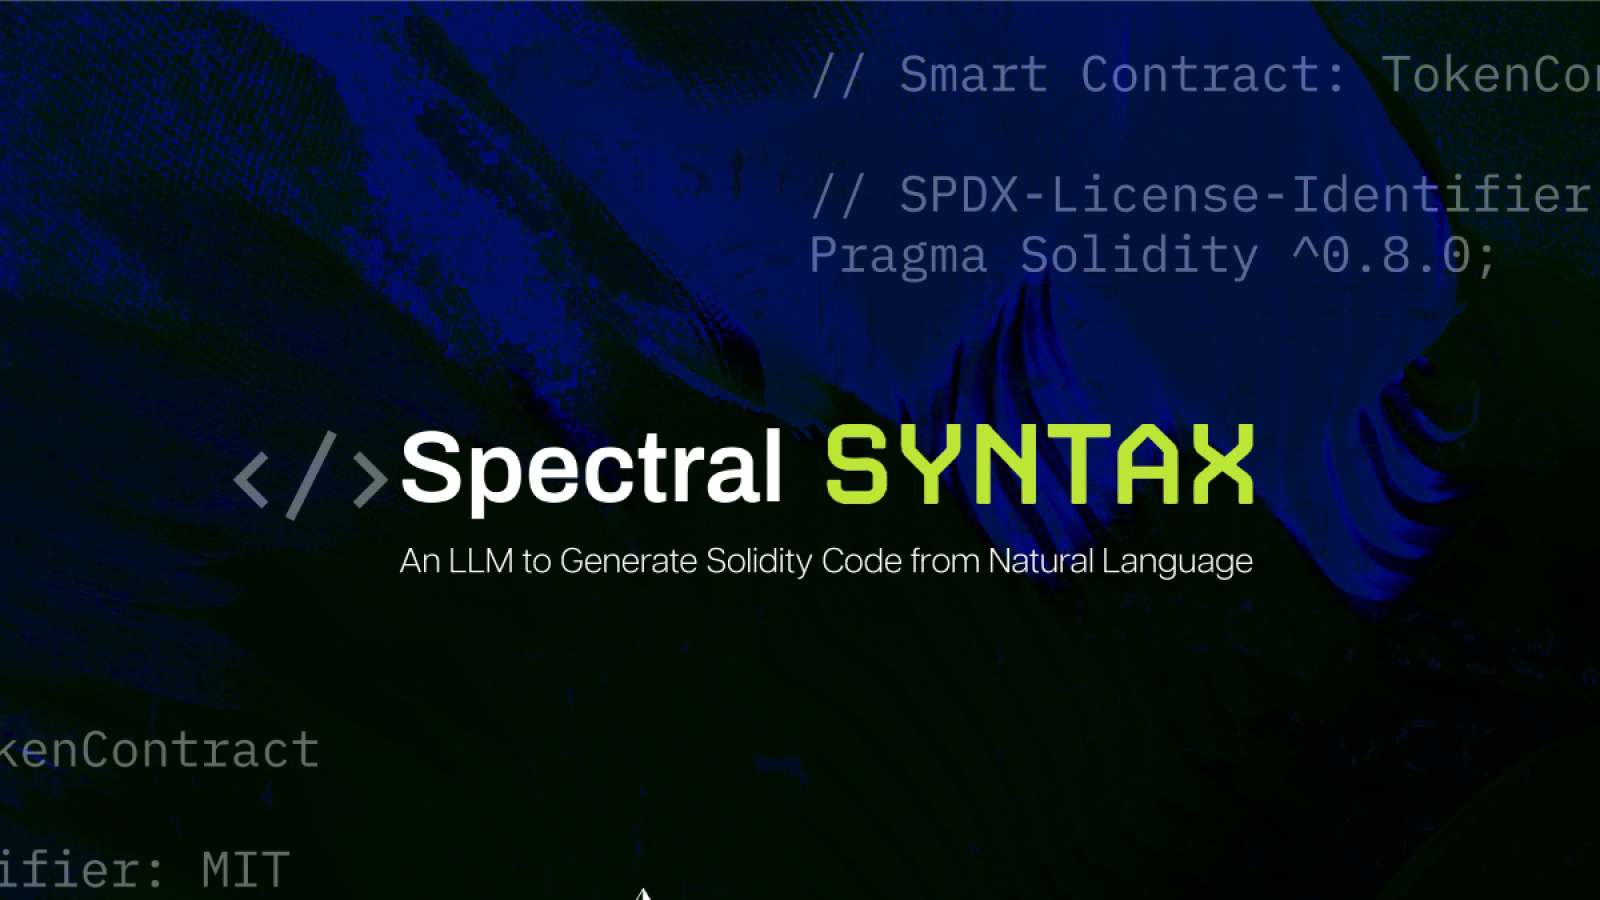 Spectral Launches Syntax, an LLM Enabling Web3 Users to Build Autonomous Agents and Deploy Onchain Products